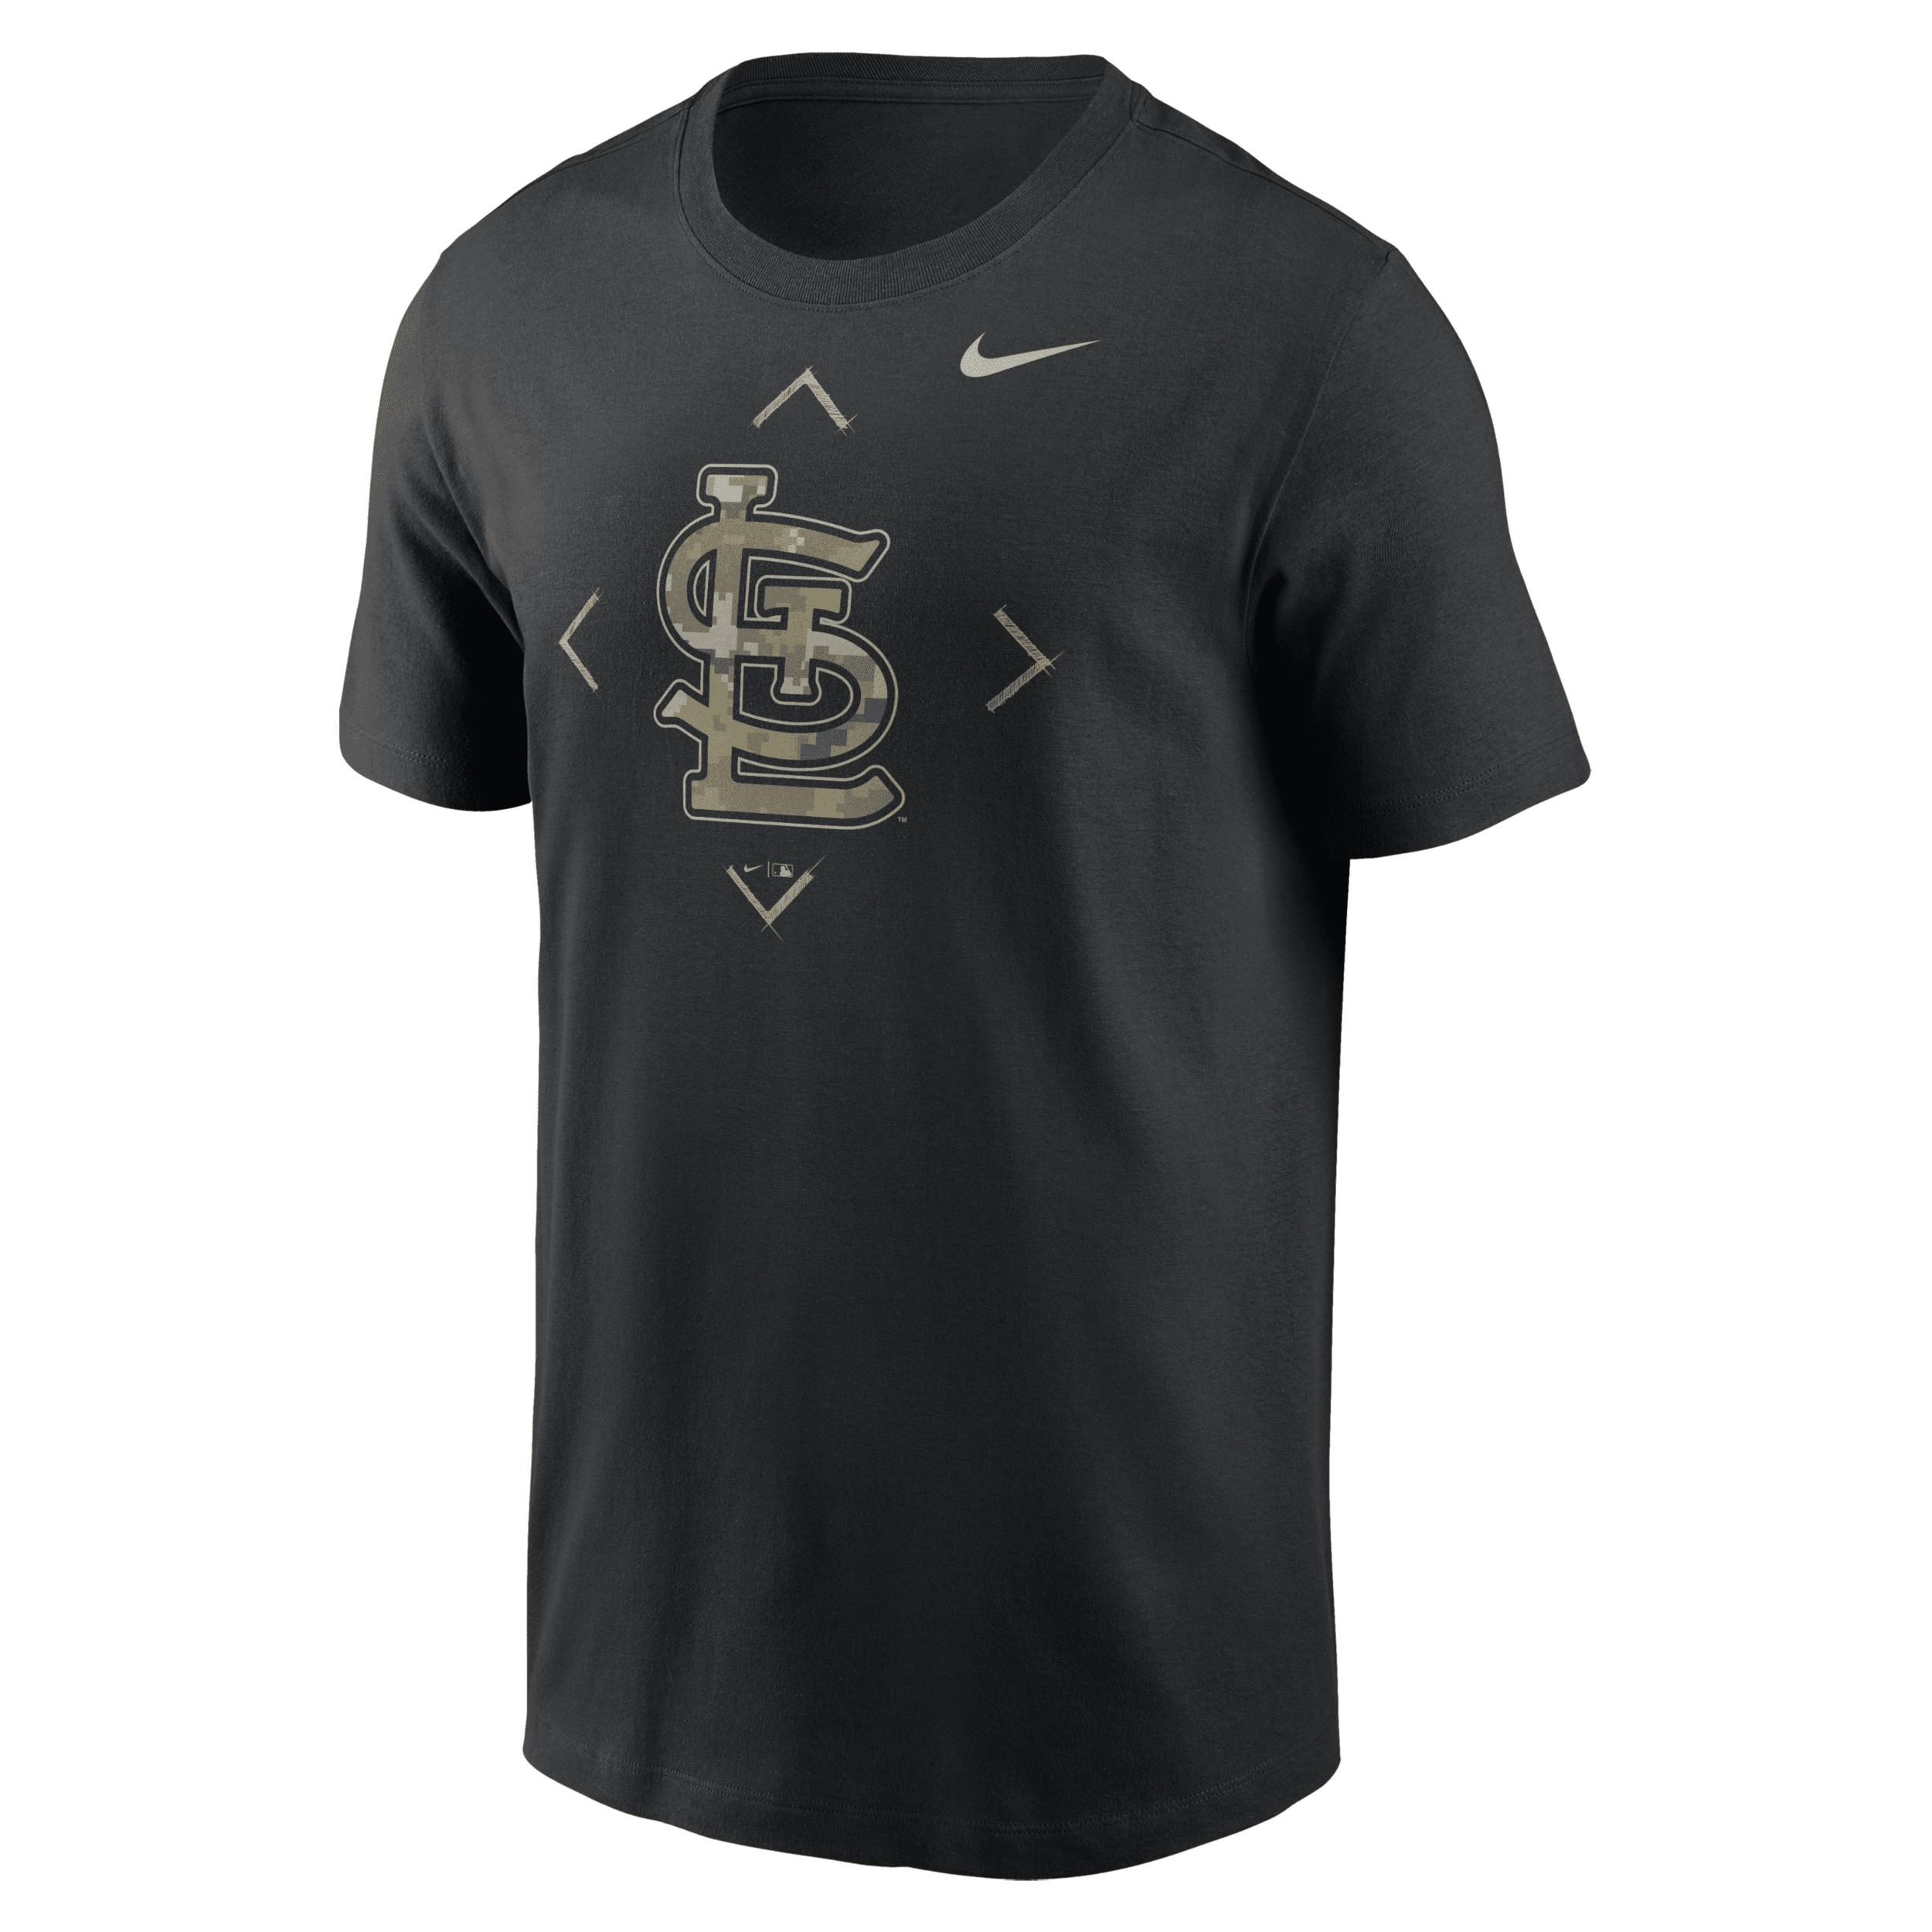 Nike Athletic (MLB St. Louis Cardinals) Men's Sleeveless Pullover Hoodie